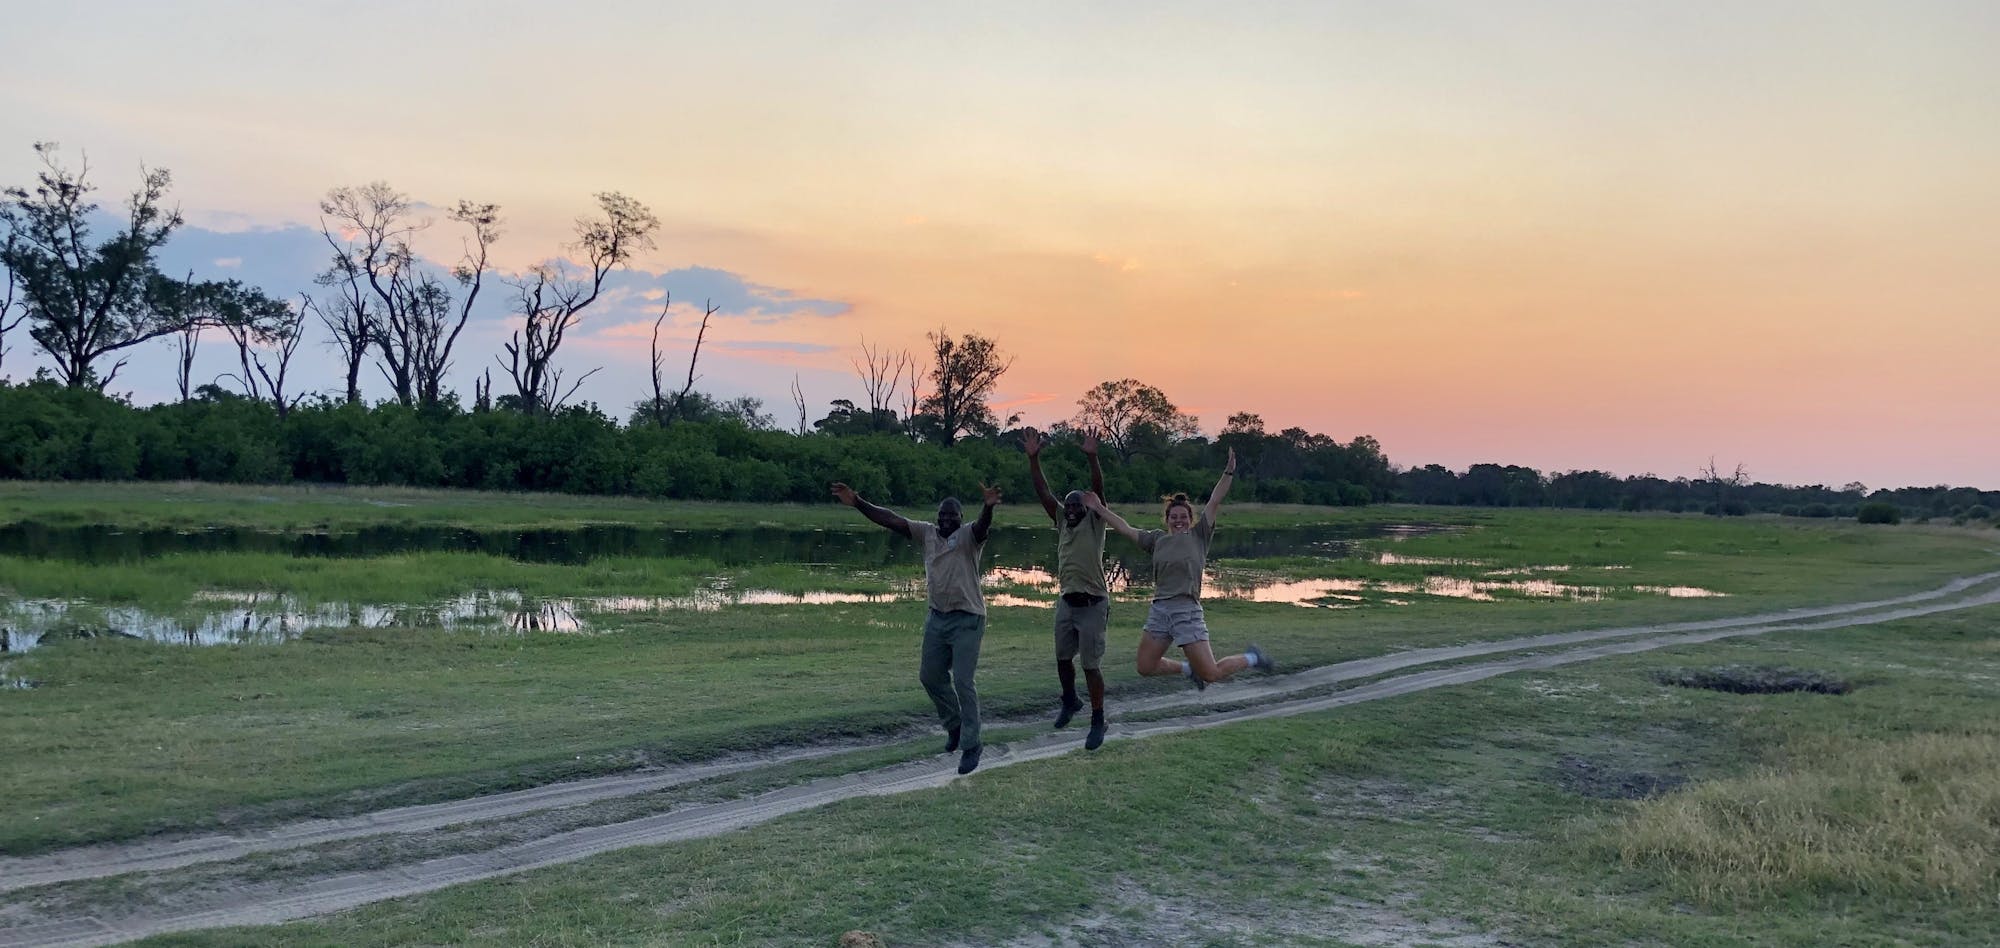 Staff and volunteering jumping in front of a sunset in the Okavango